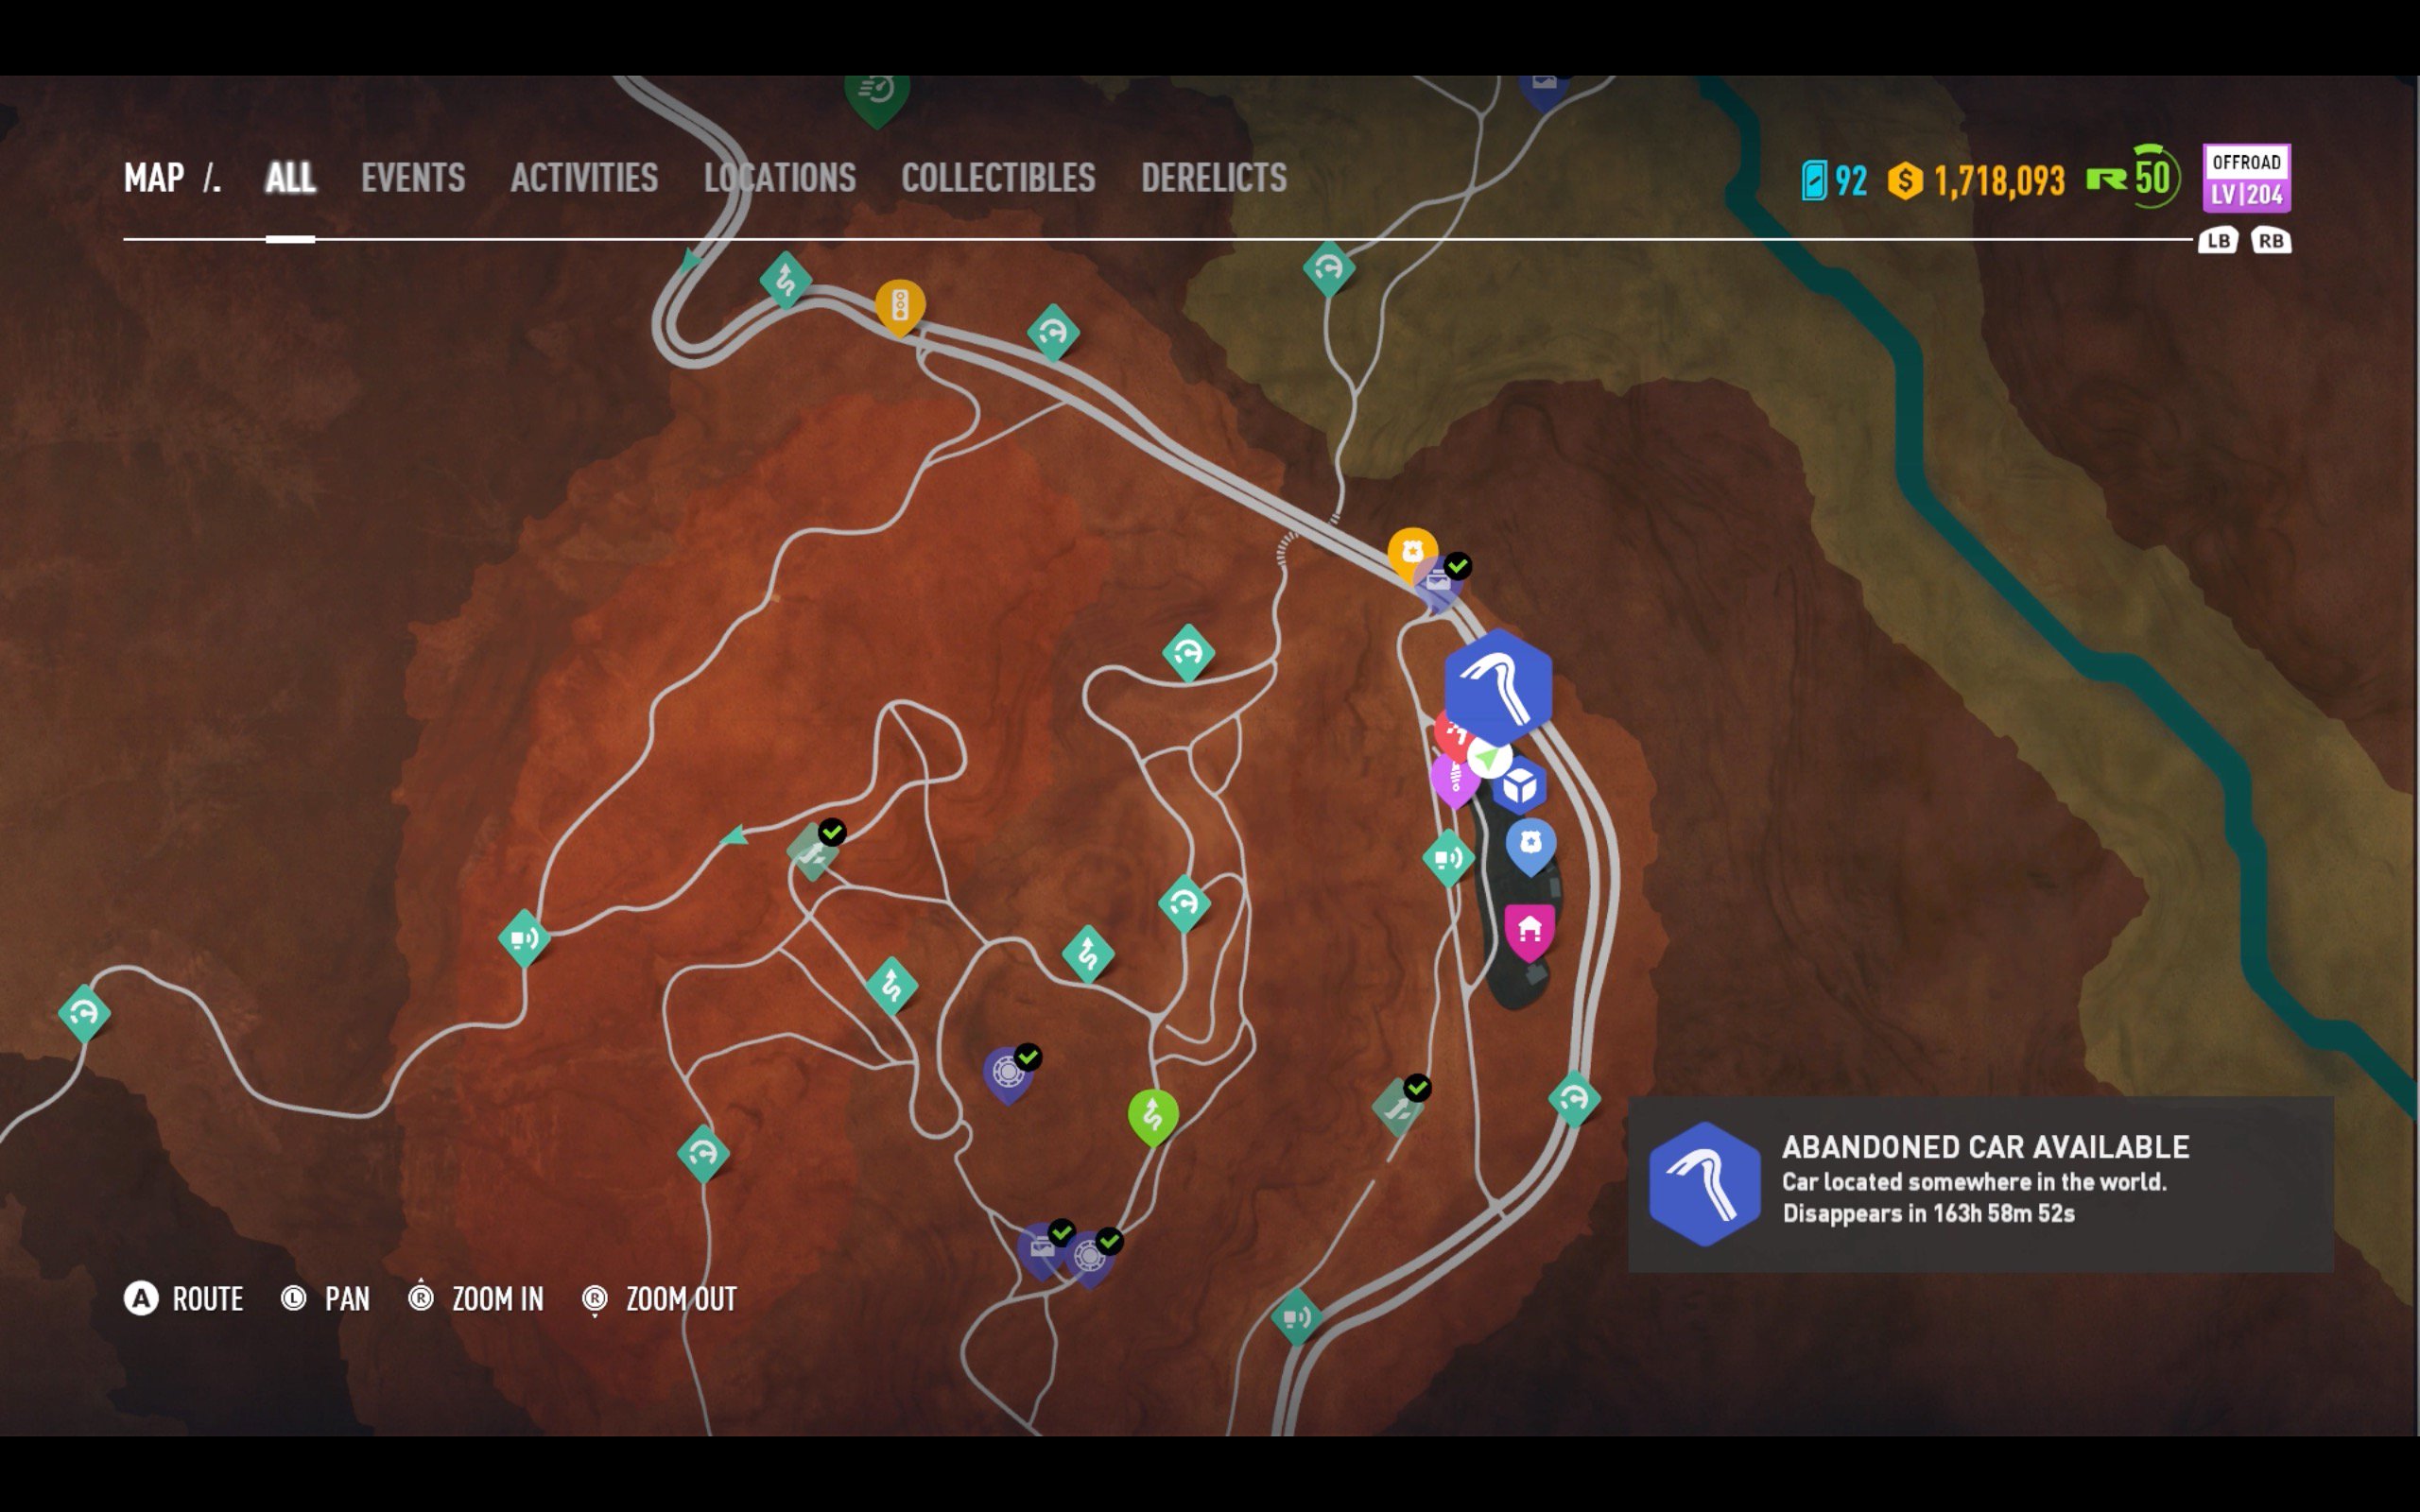 Nfs payback трейнер. Need for Speed Payback фишки на карте. Ford Mustang NFS Payback Map. Уличные Лиги в need for Speed Payback. Задания нфс пейбек.